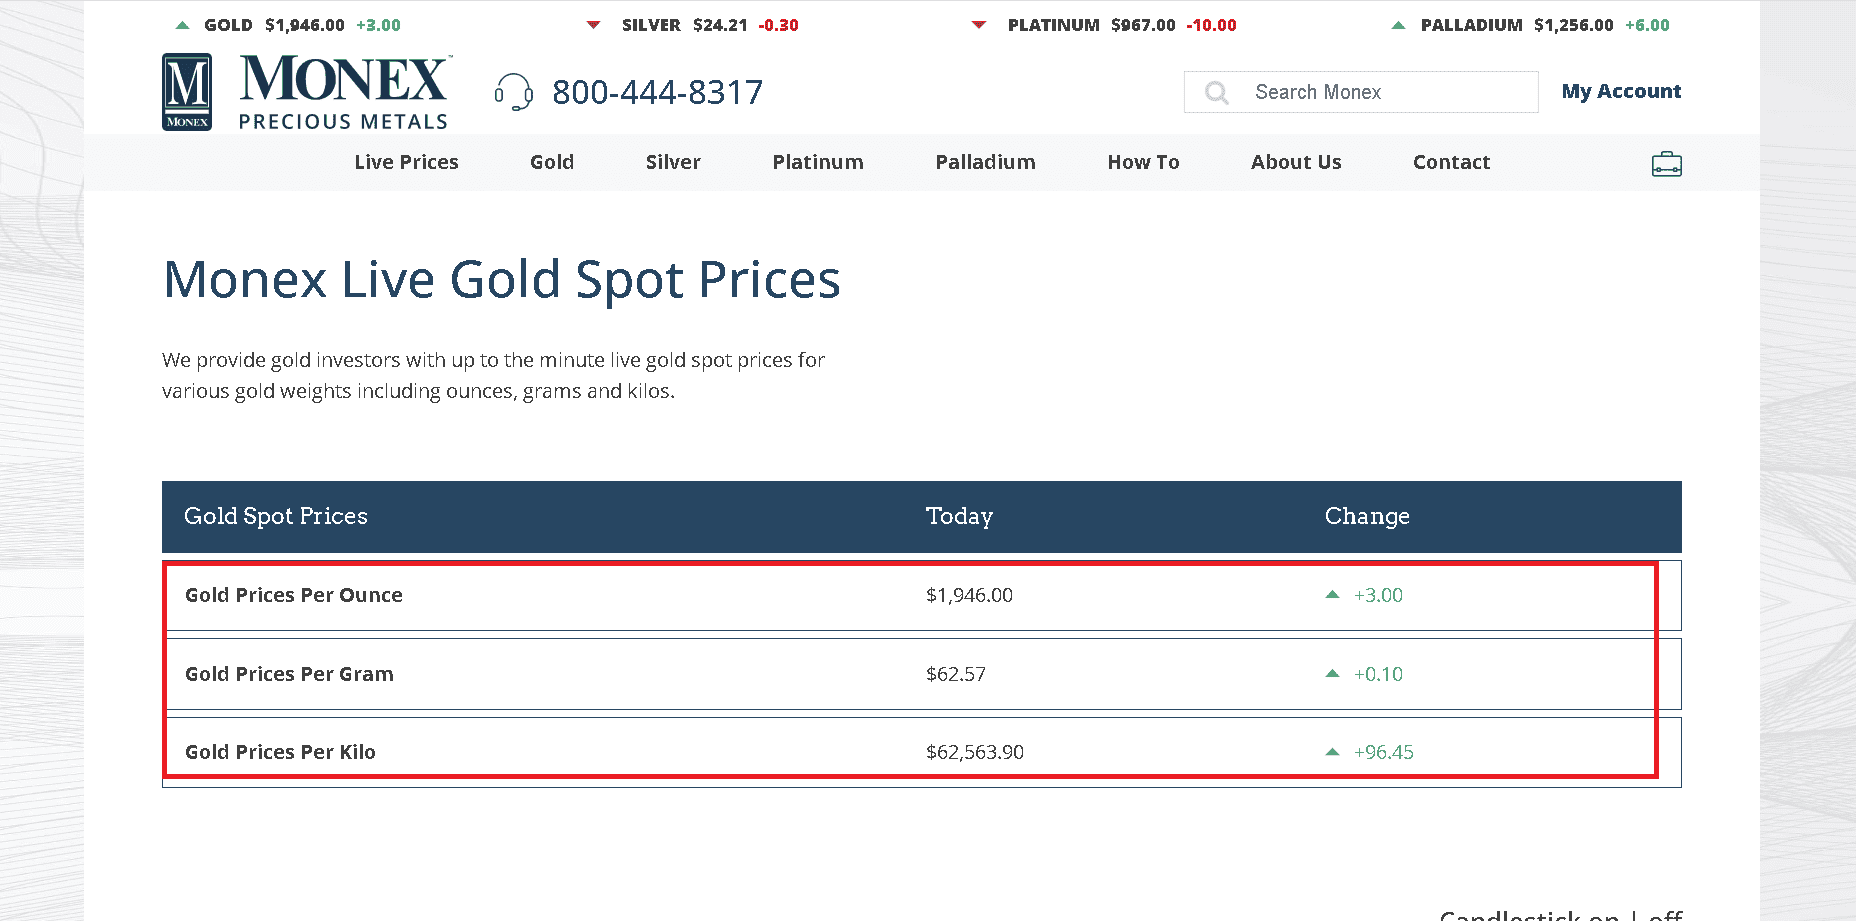 Gold spot prices